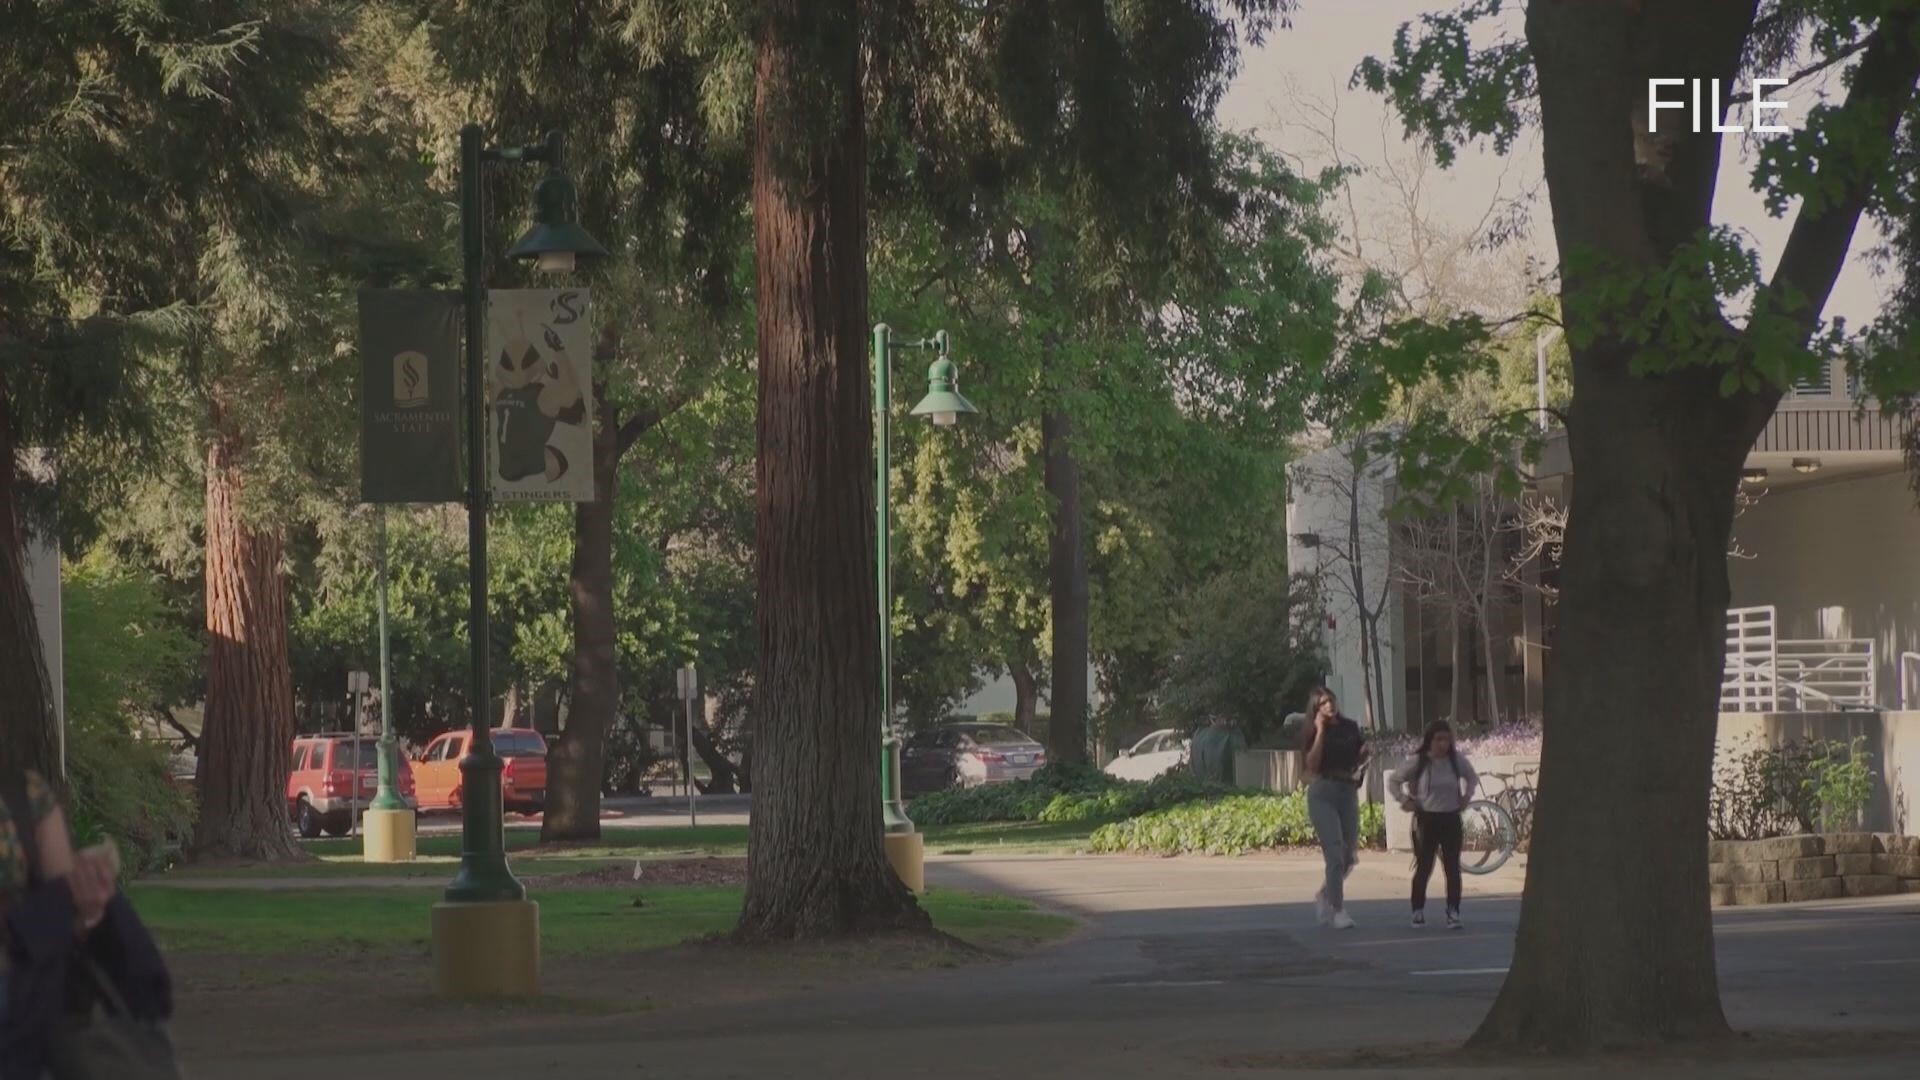 64 students were admitted to the University of California system because of their families’ donations and connections, the report found.